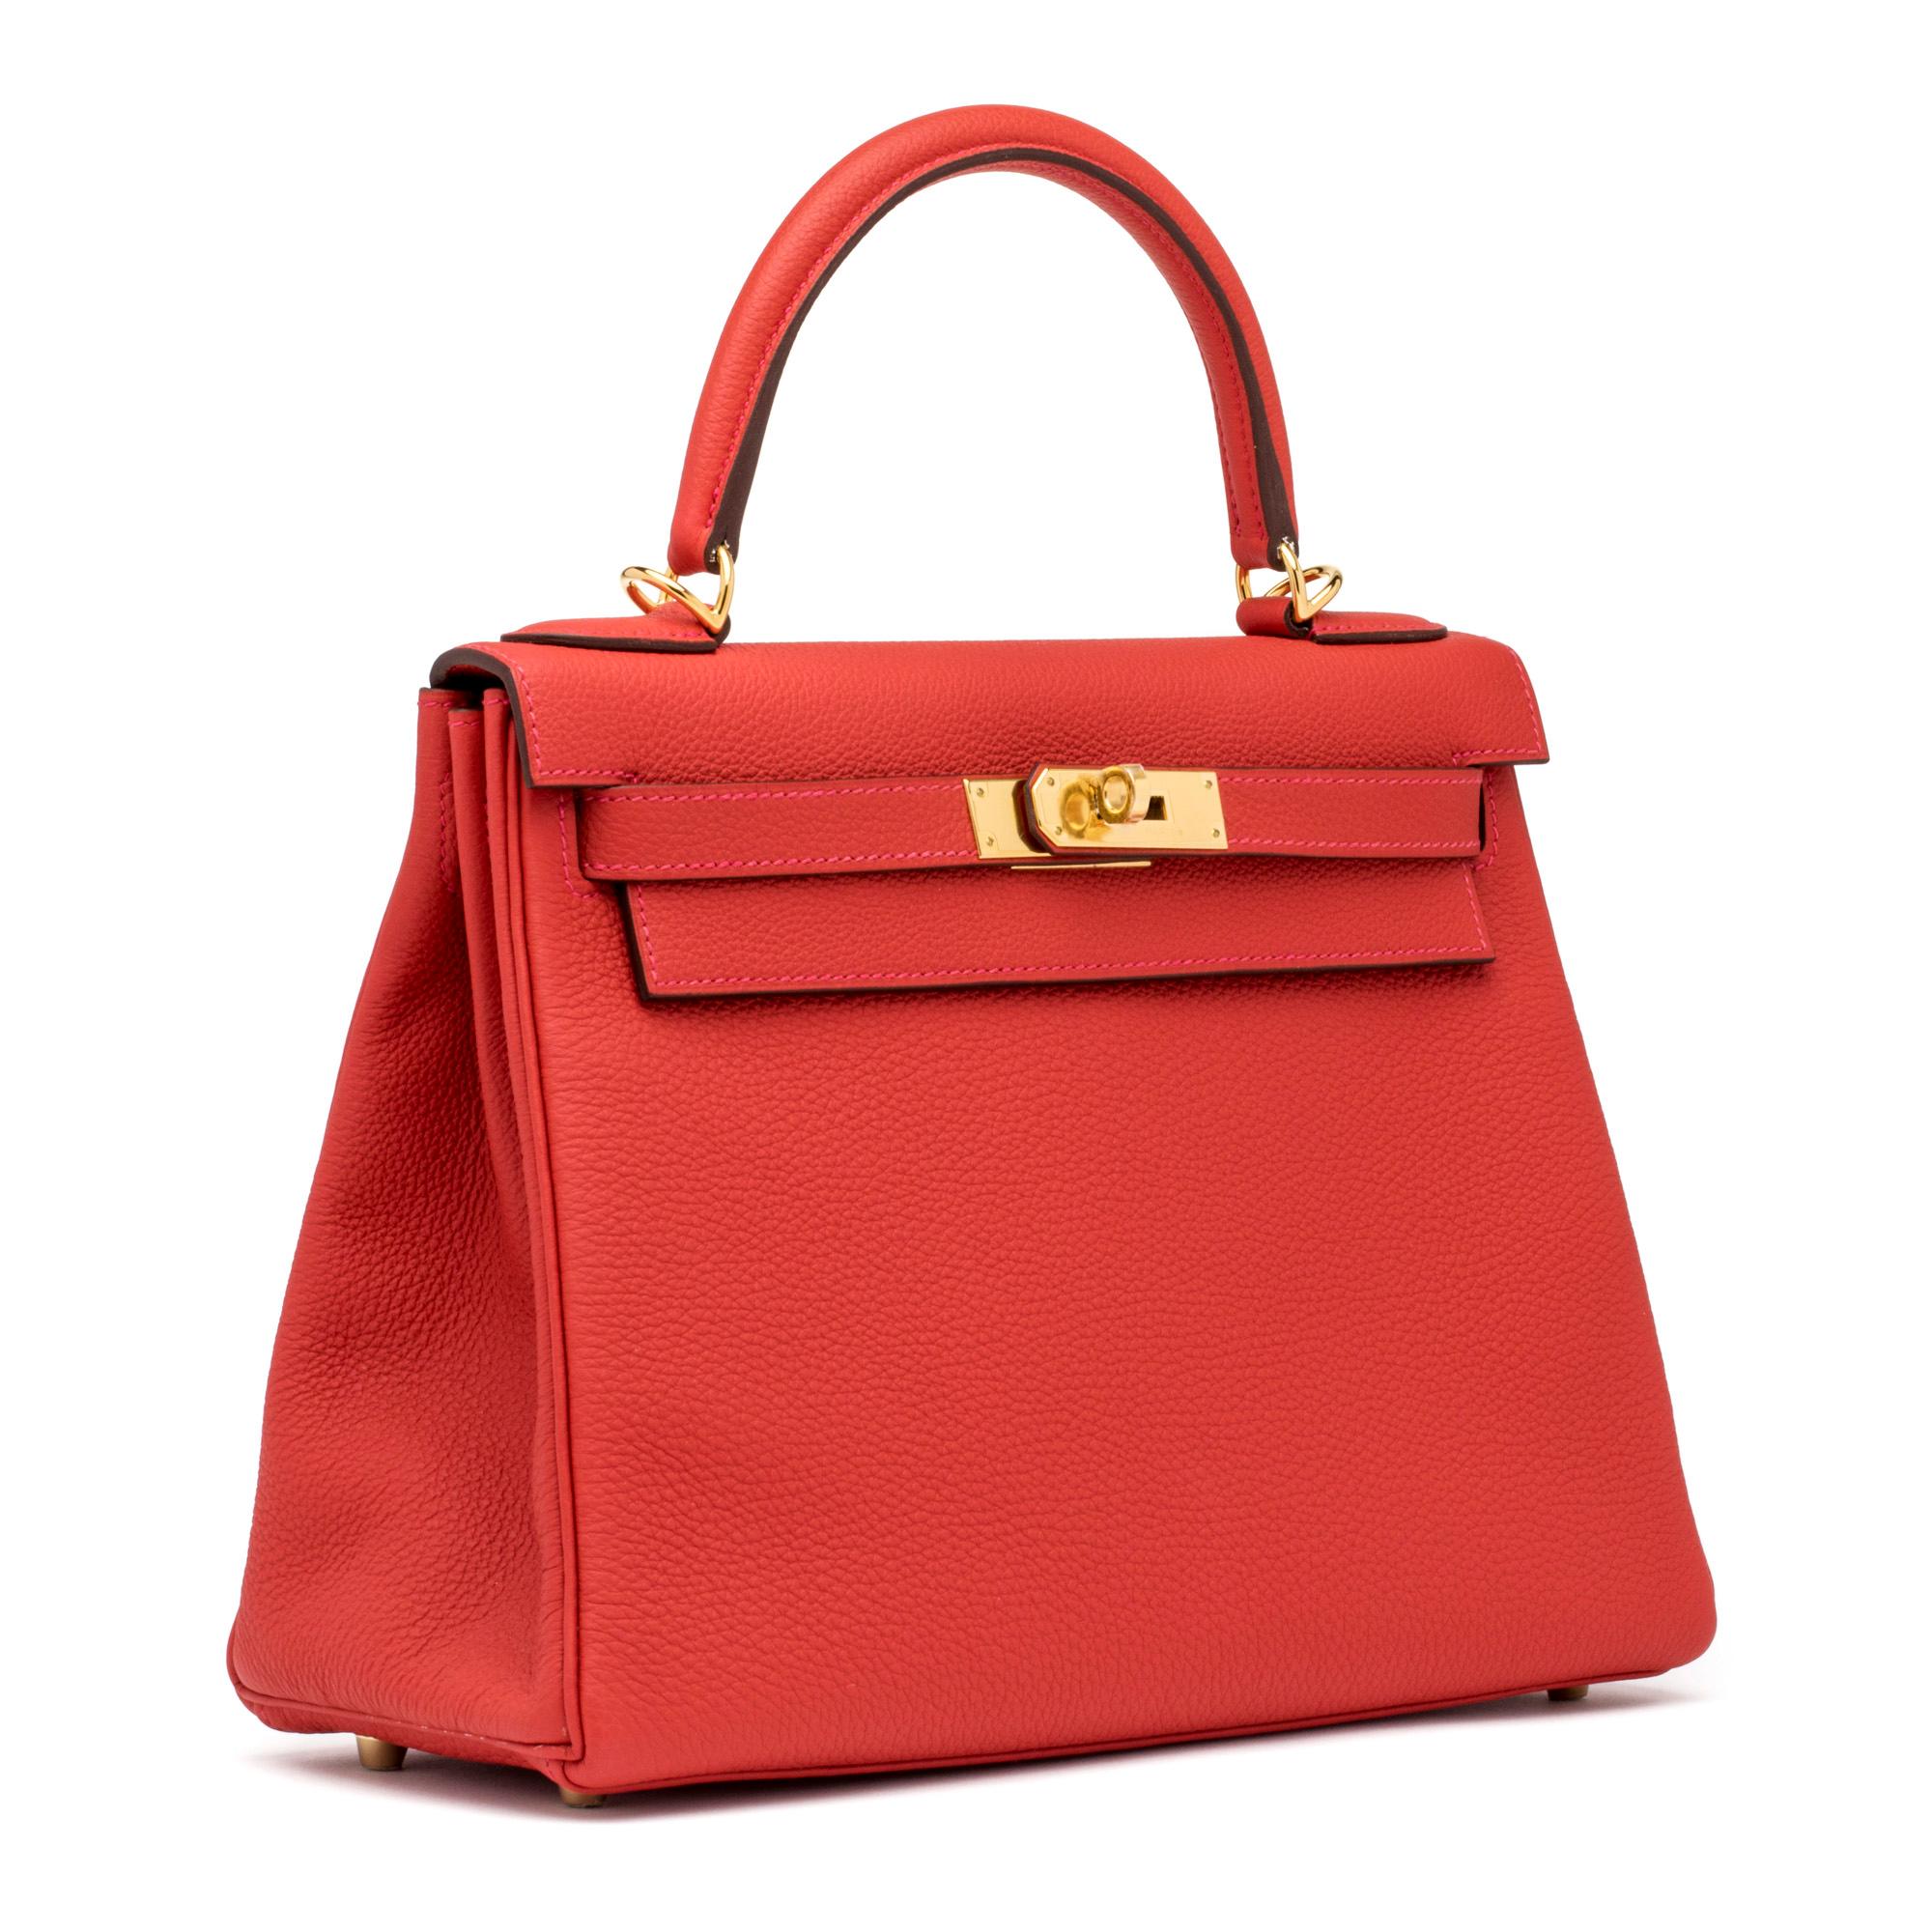 The Hermés Kelly bag embodies the quintessence of style and luxury due to its impeccable design, craftsmanship, and significance. That being said, it is the most iconic and desired piece from the Hermés handbag collection.